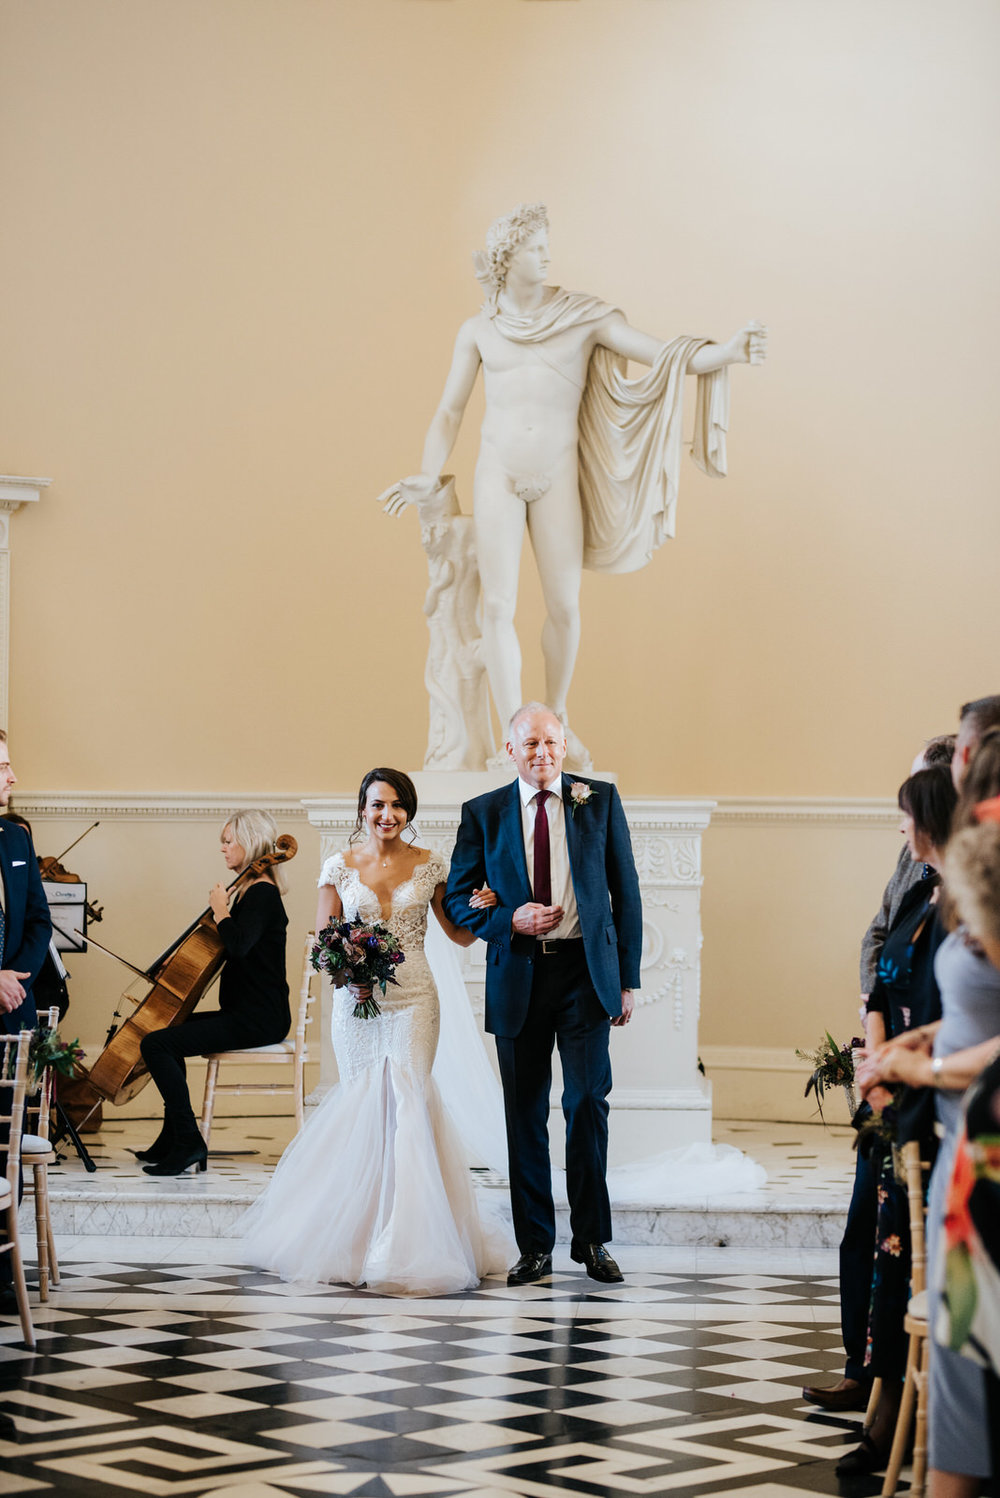 Bride and step-dad walk down the aisle as people smile